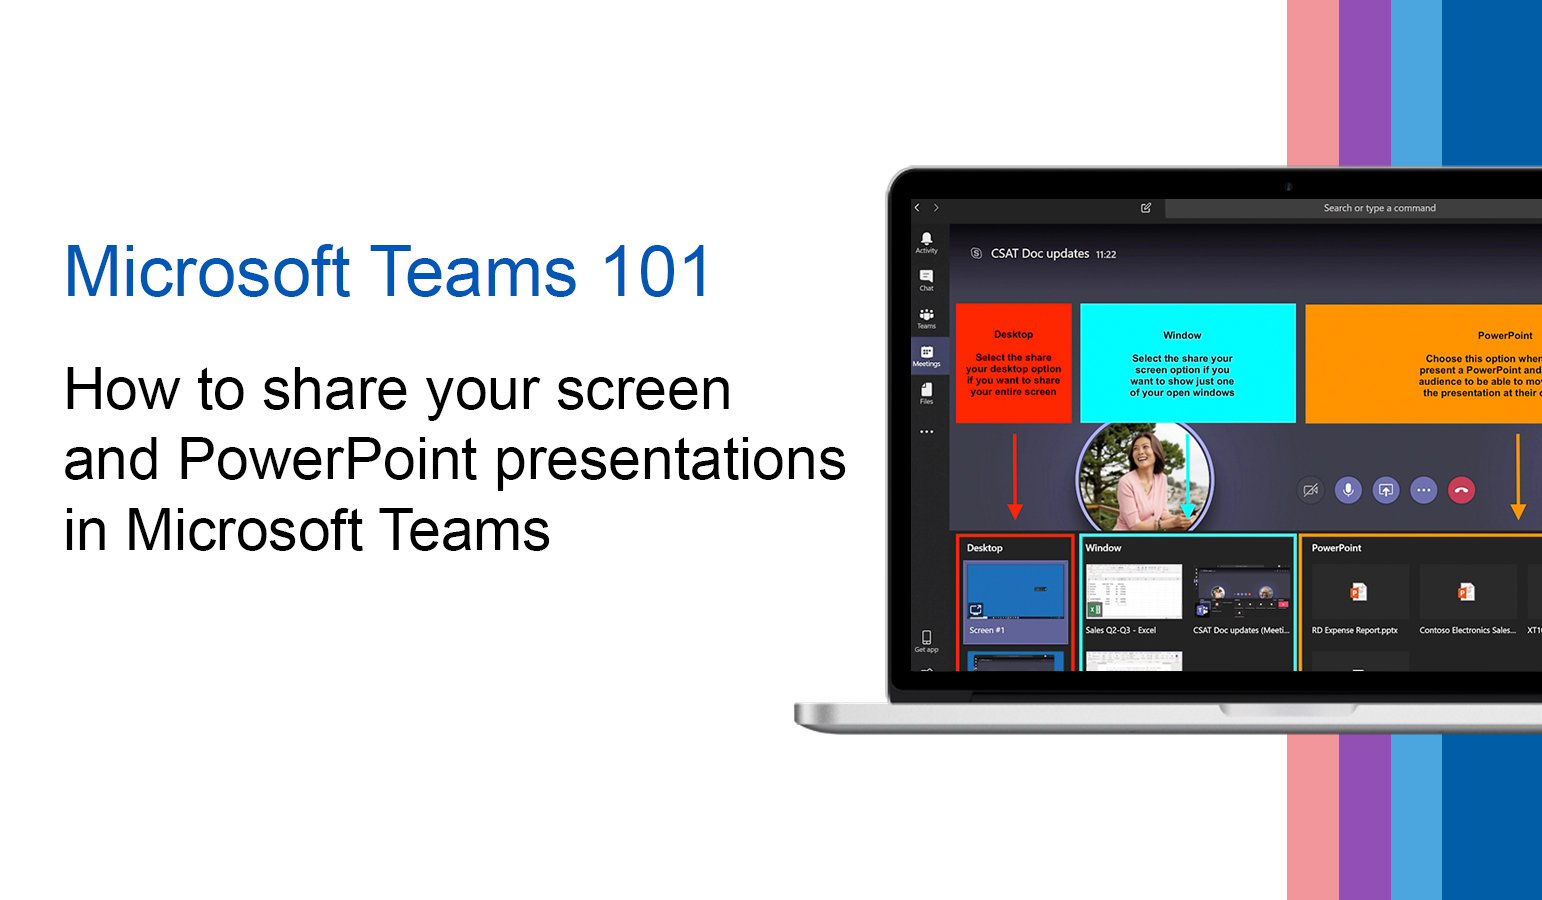 teams share powerpoint presentation without notes